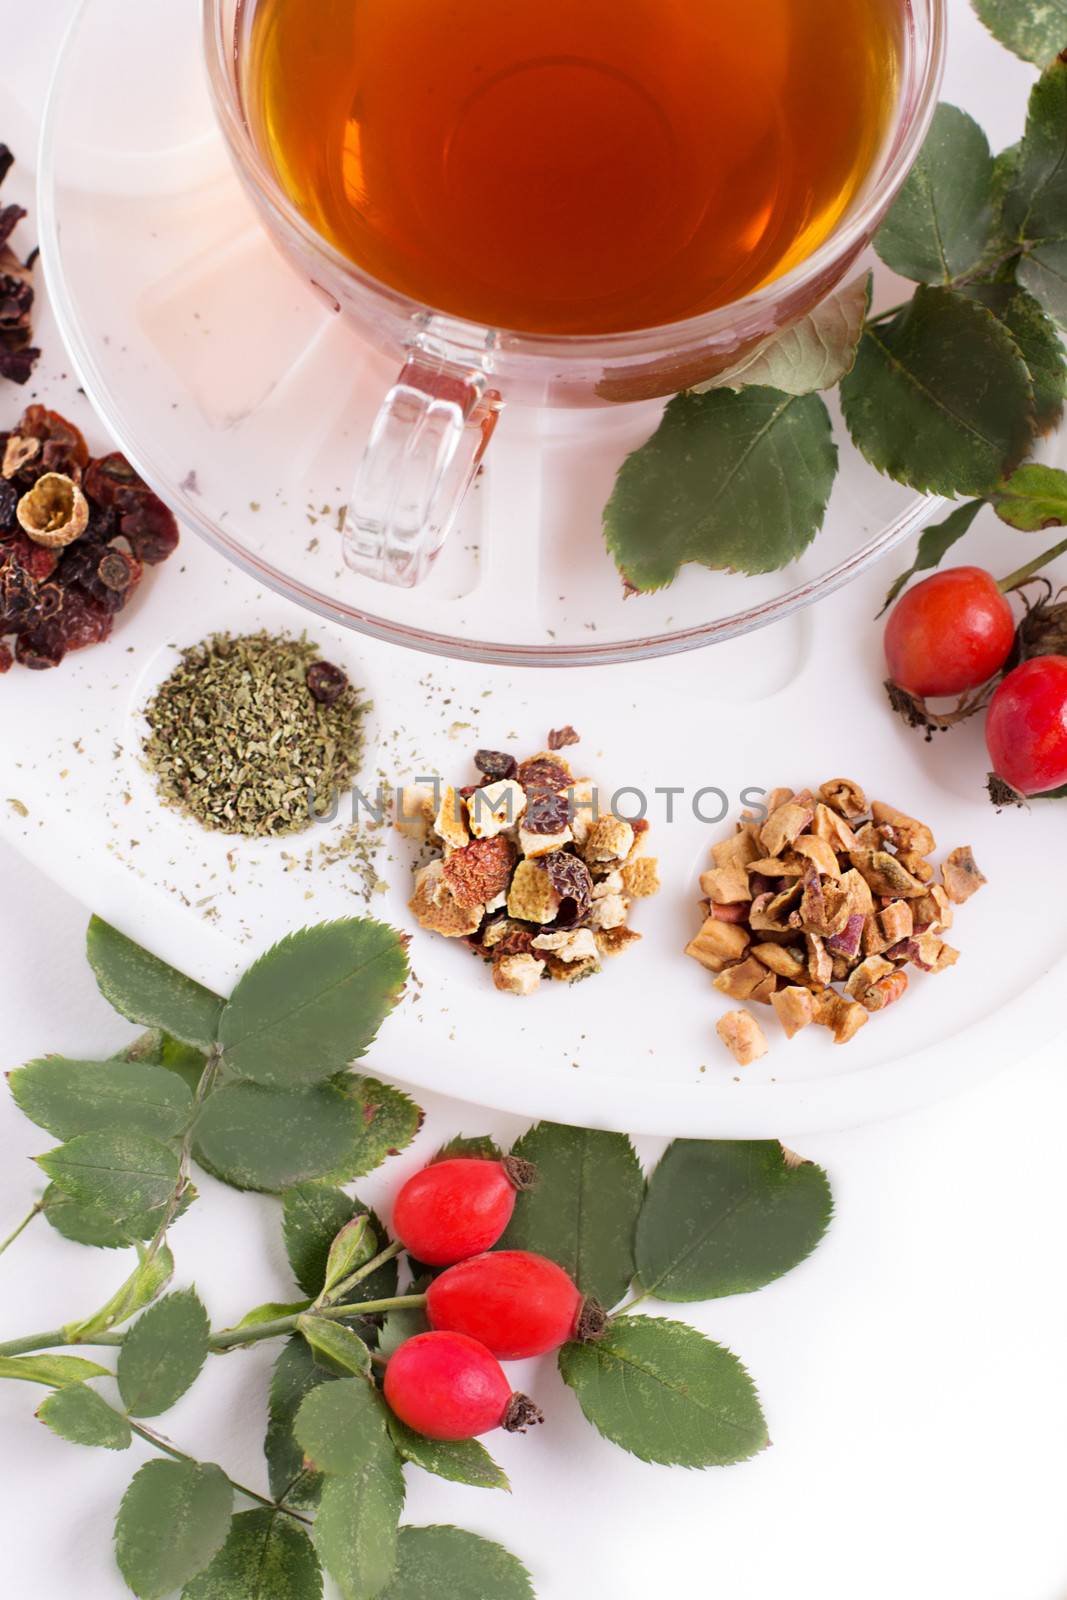 Assortment of dry tea in palette by Angel_a